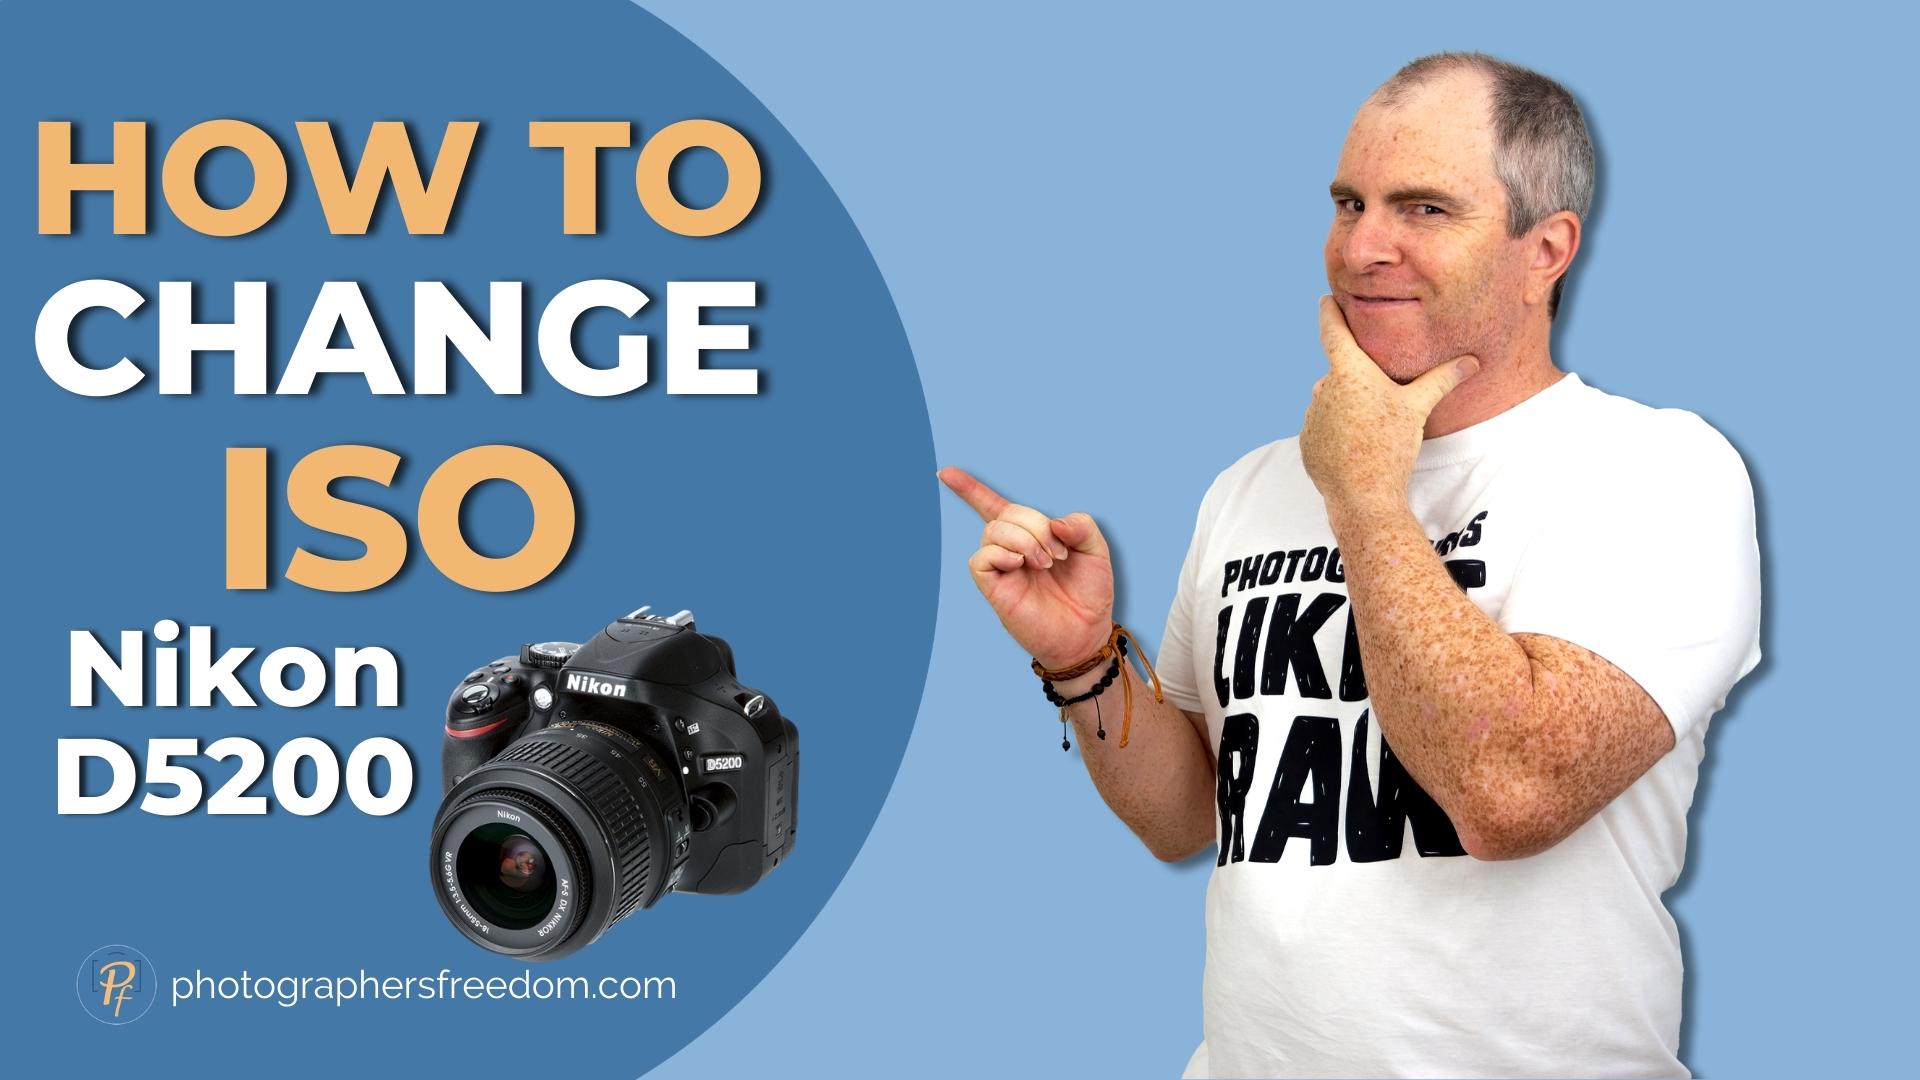 'Video thumbnail for How To Change ISO Nikon D5200 - 3 Ways To Change Your ISO Settings'